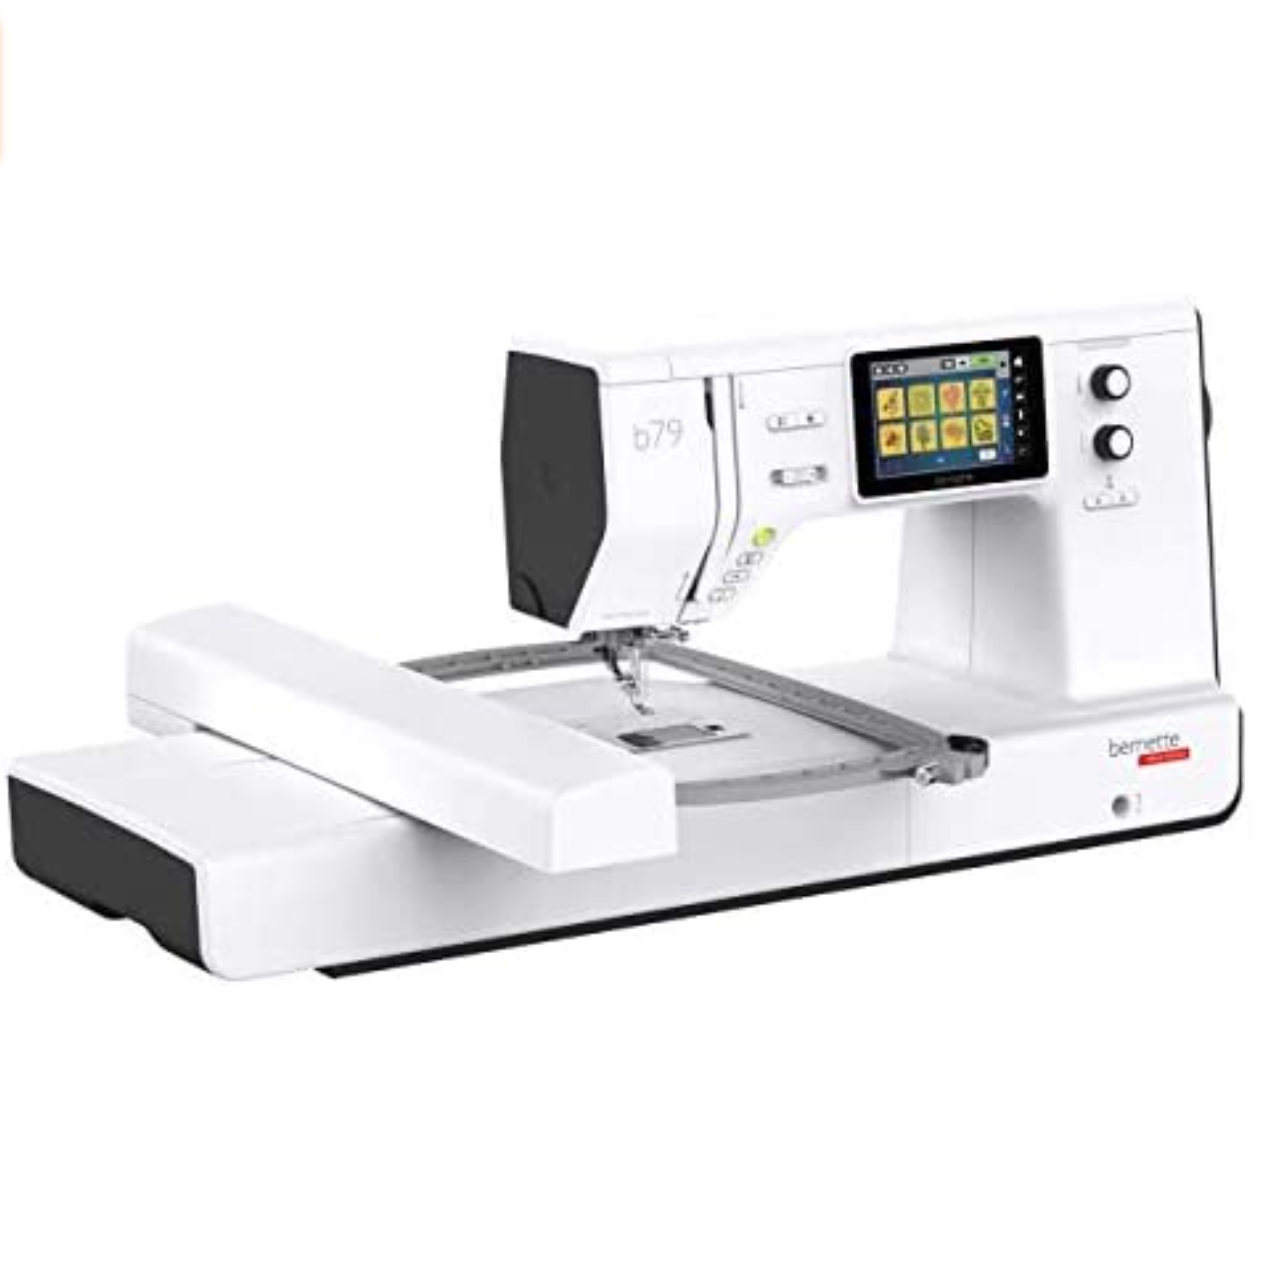 Bernette Sewing & Embroidery Machine: B79